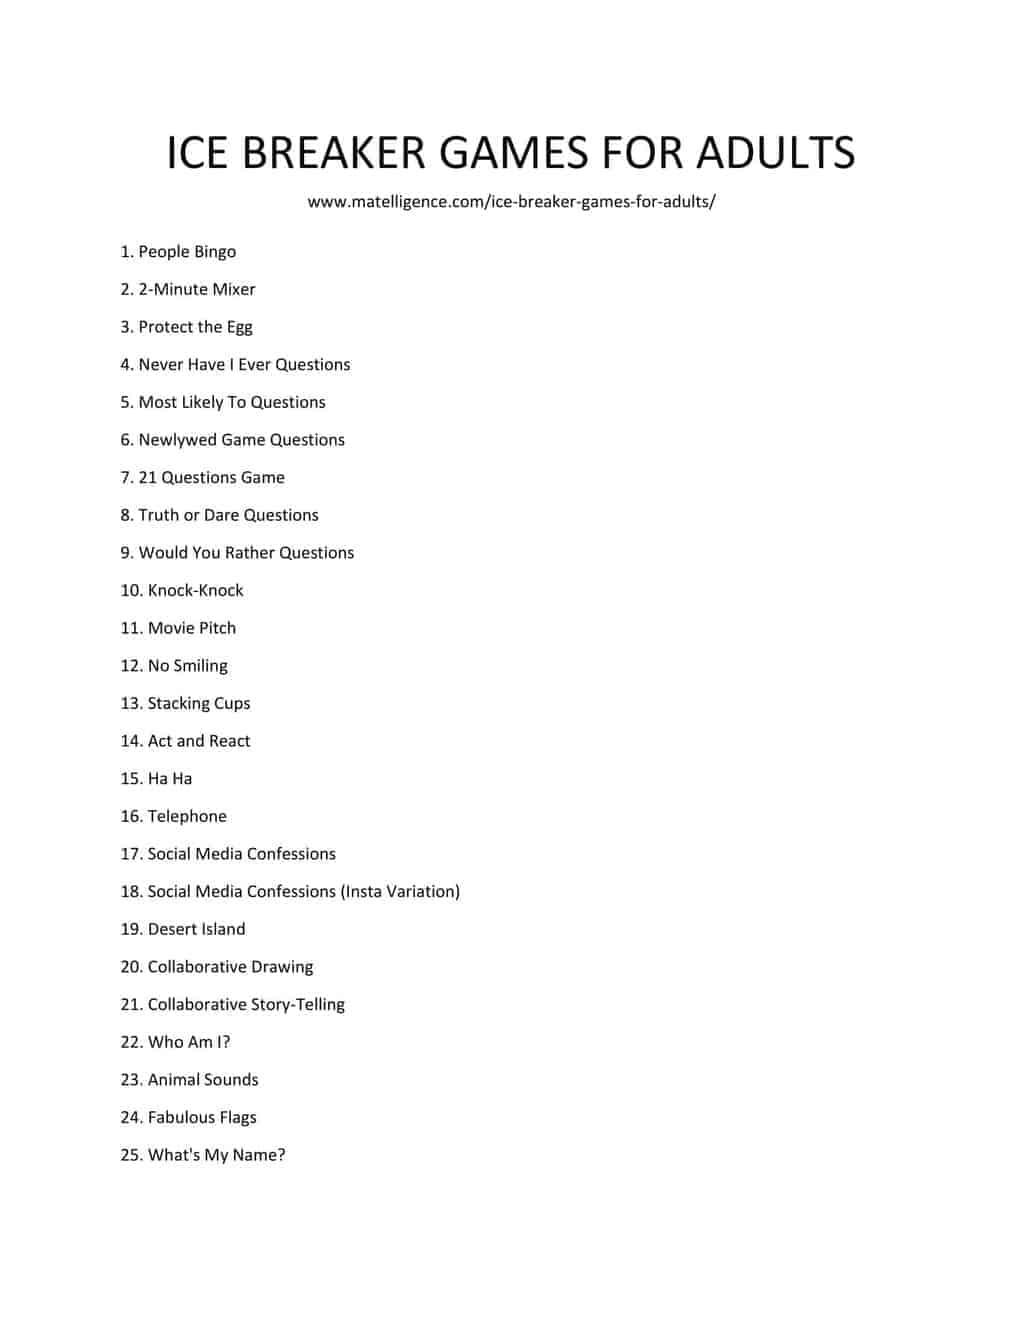 ice breaker games ideas for adults